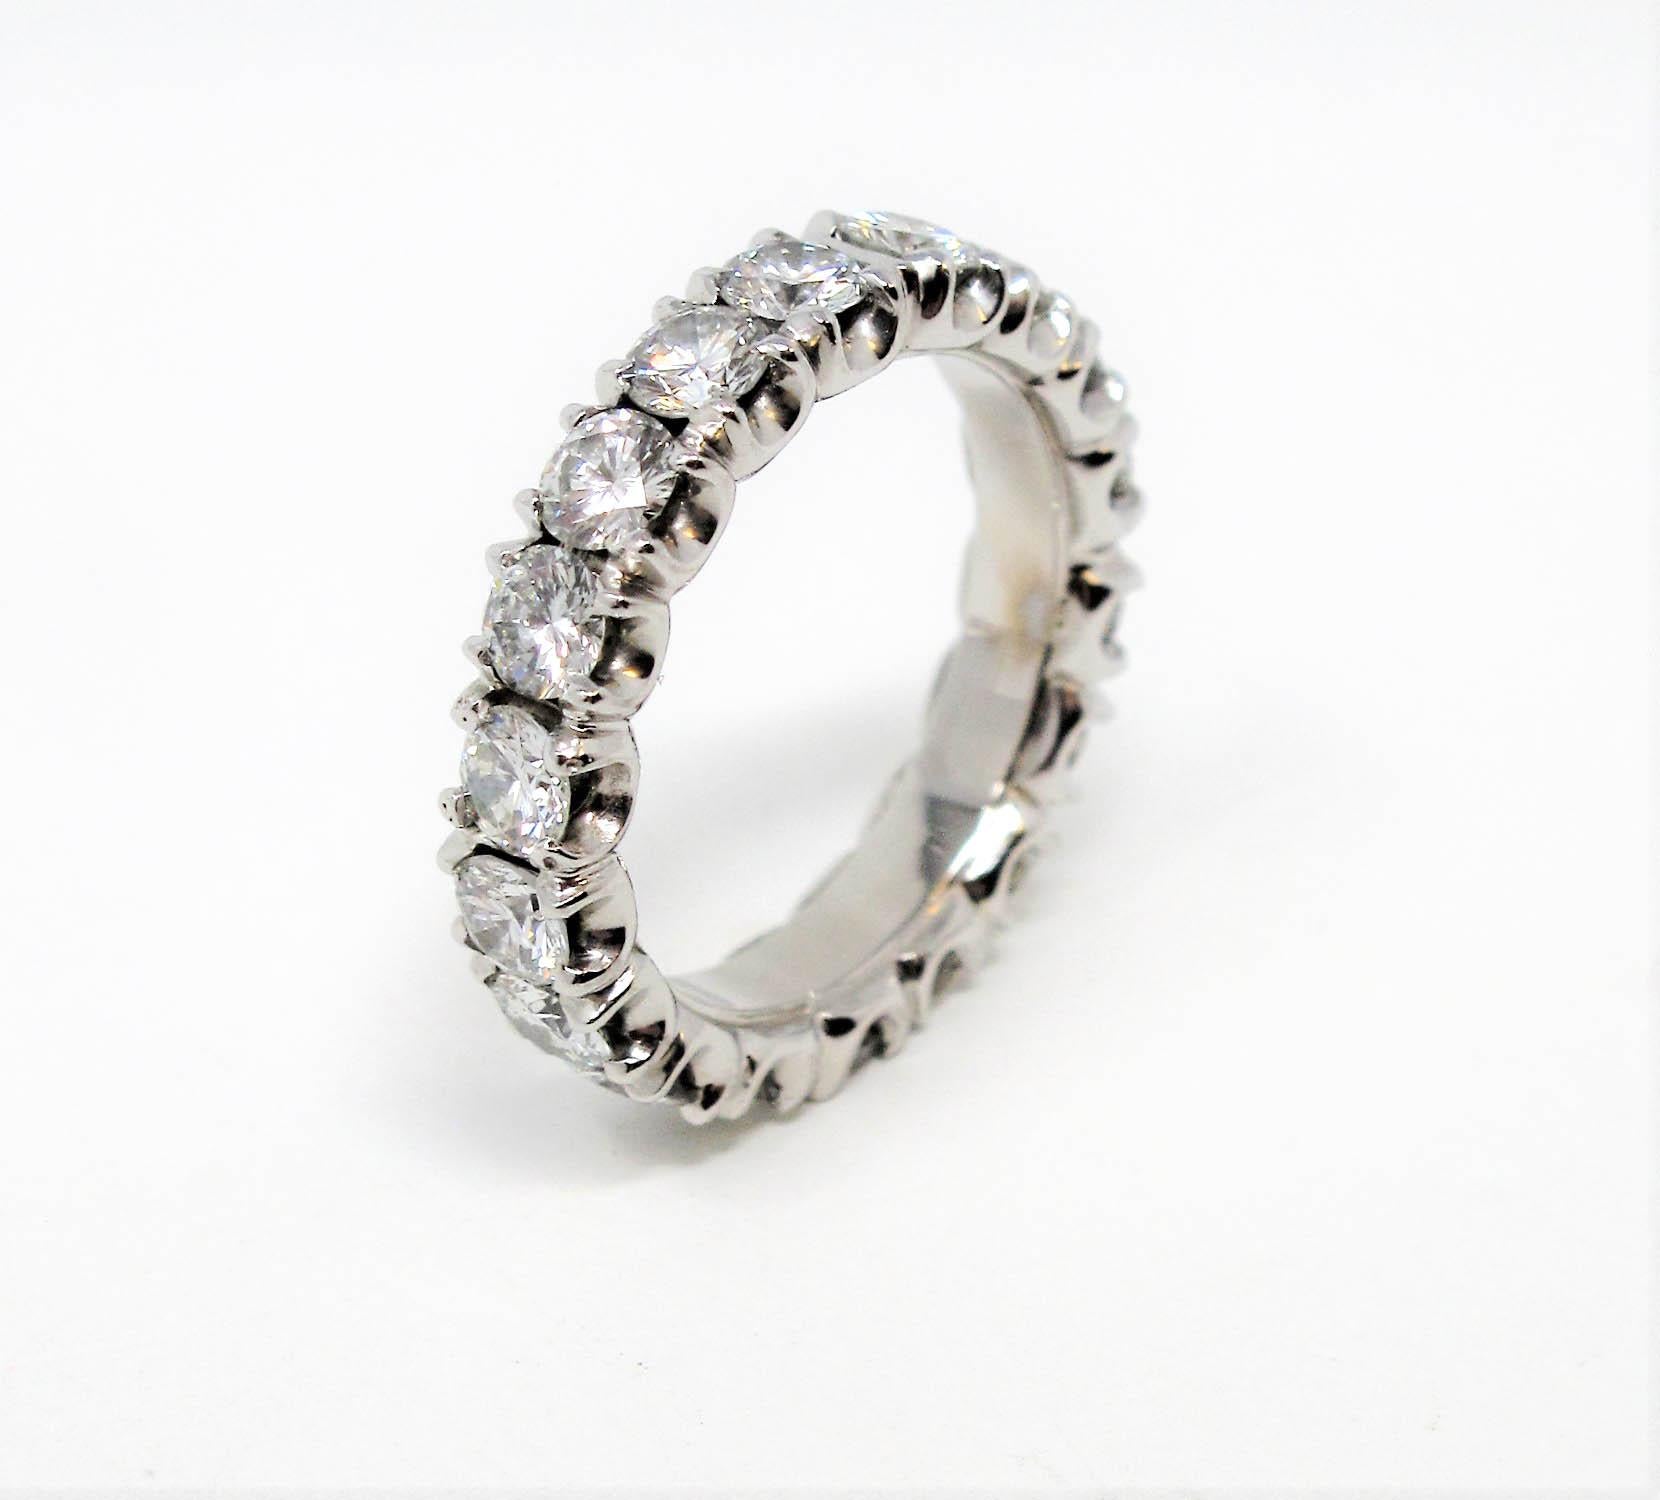 Absolutely gorgeous diamond eternity band ring. This remarkable ring features a full circle of icy white round diamonds that truly shimmer and shine from every angle. The slightly wider band style also enhances the incredible sparkle, making this